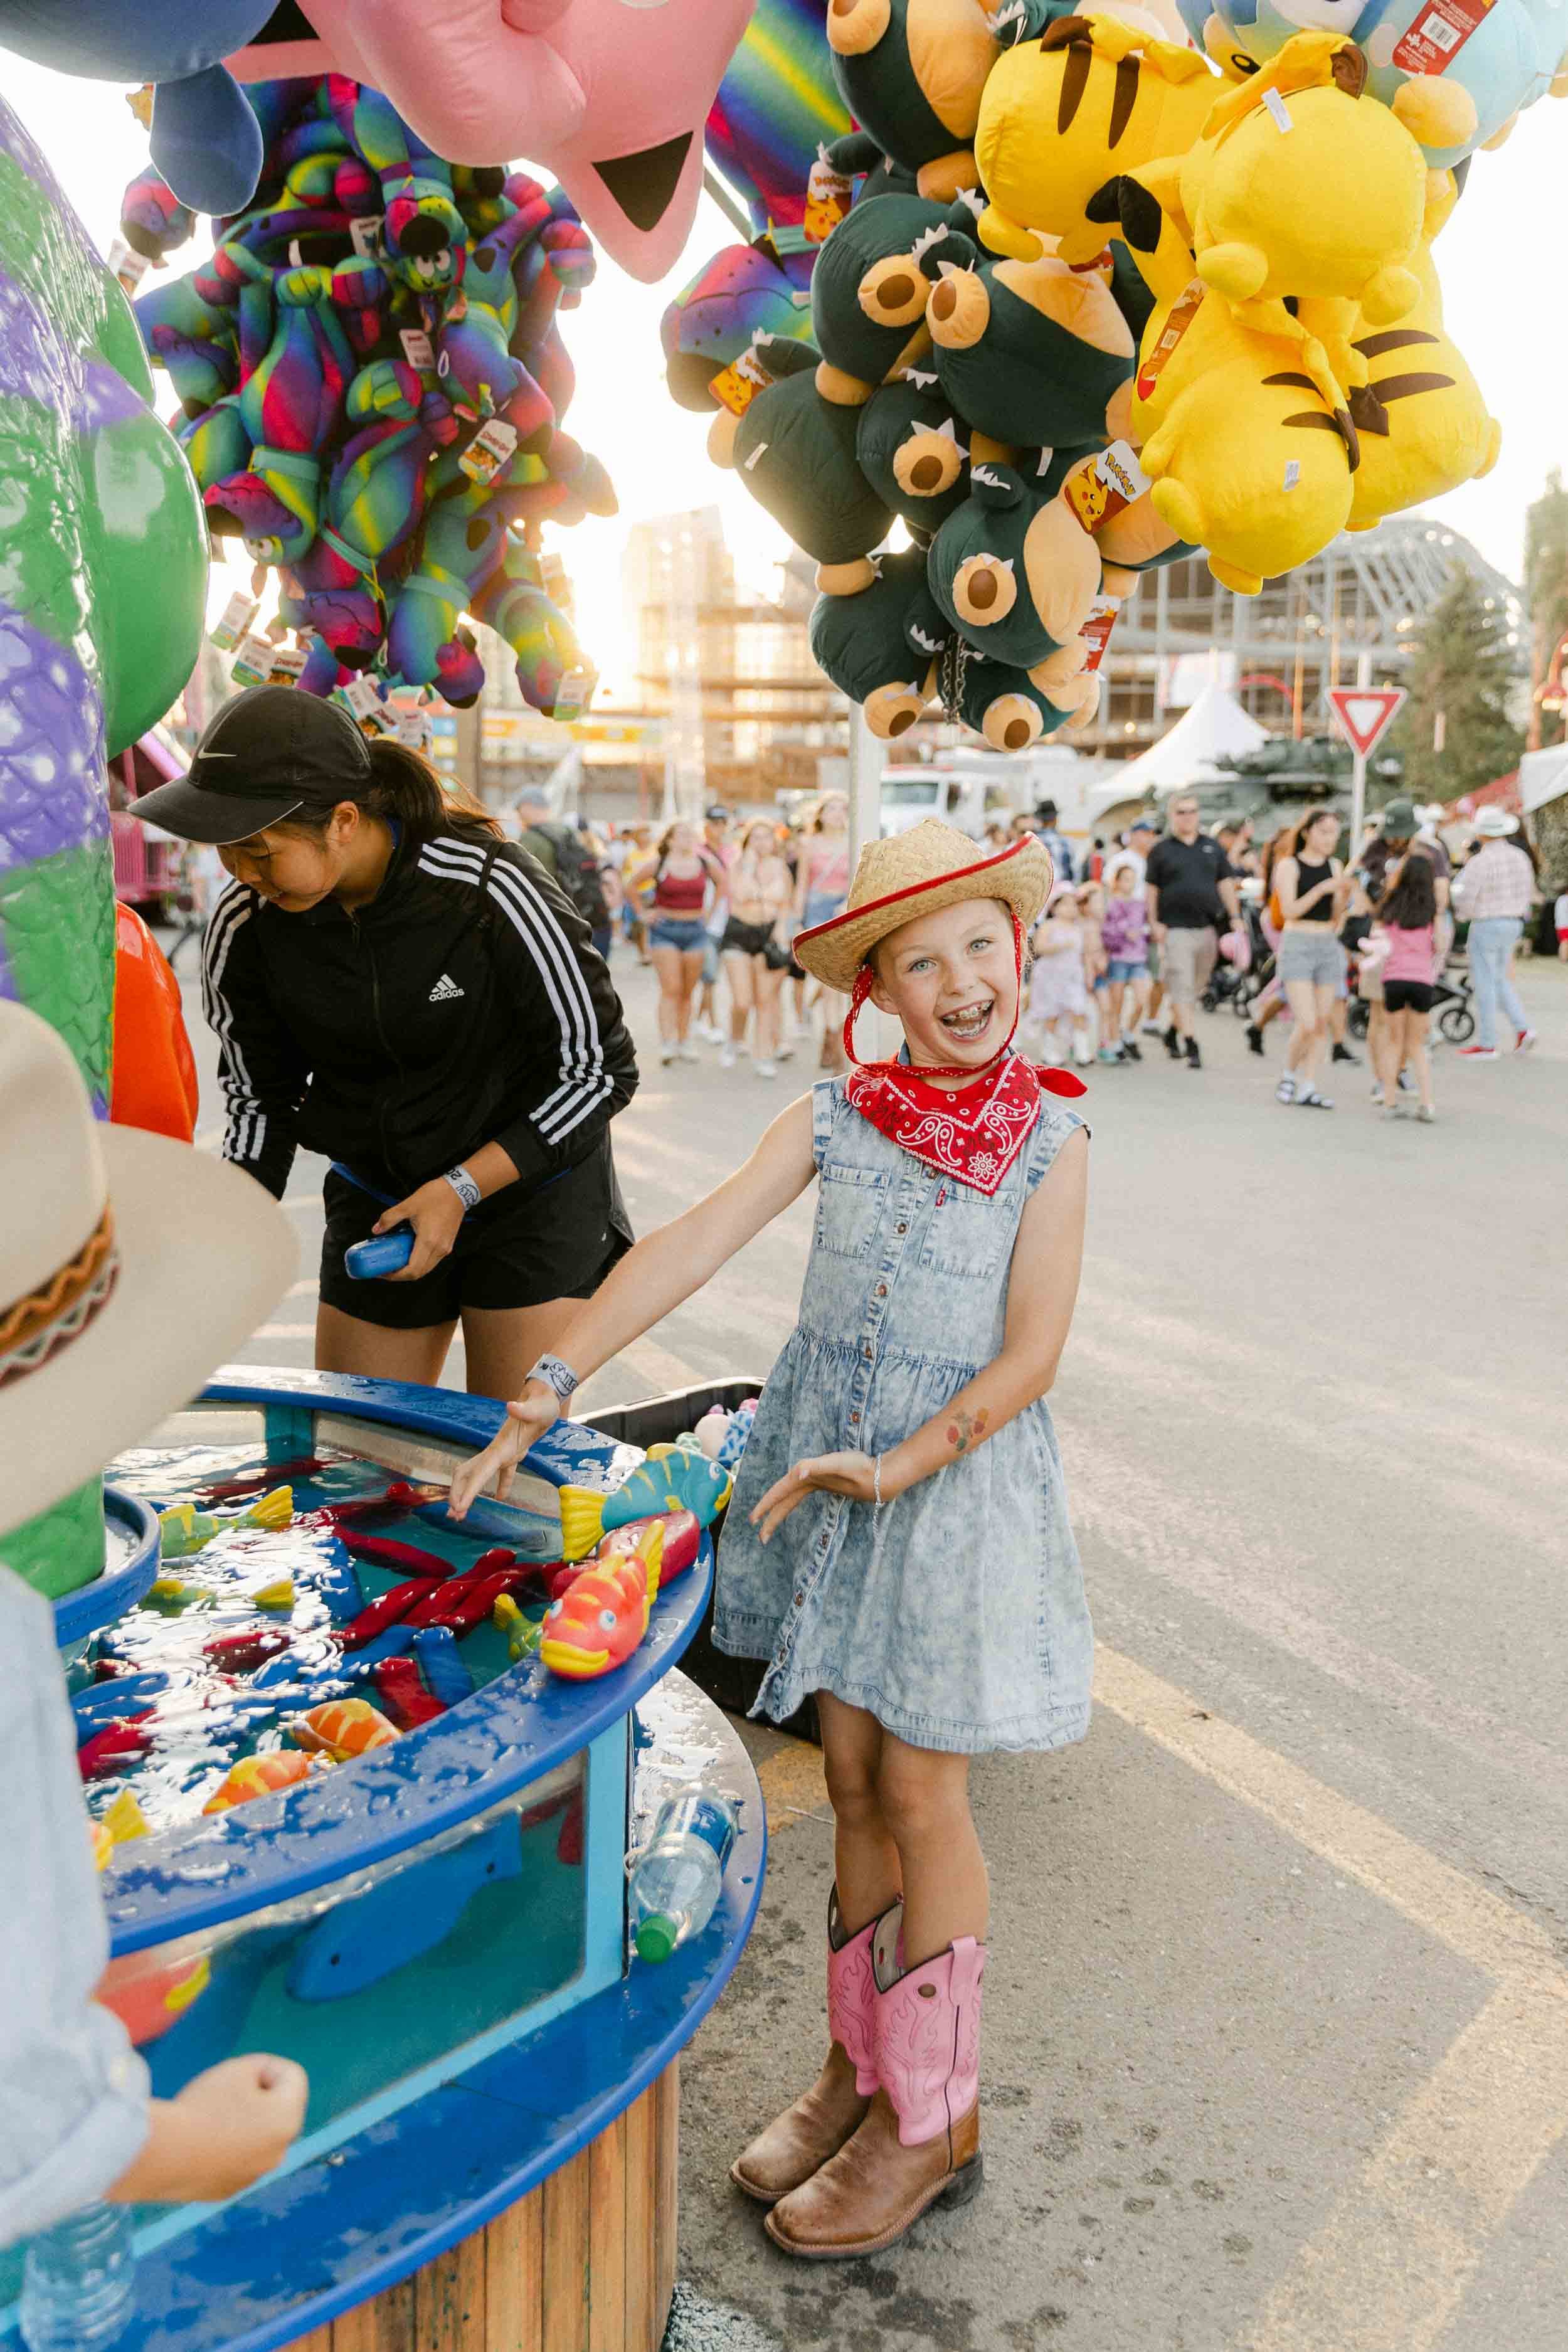 Carnival Rides Calgary Stampede 10 Best Place to Take Instagrammable Photos